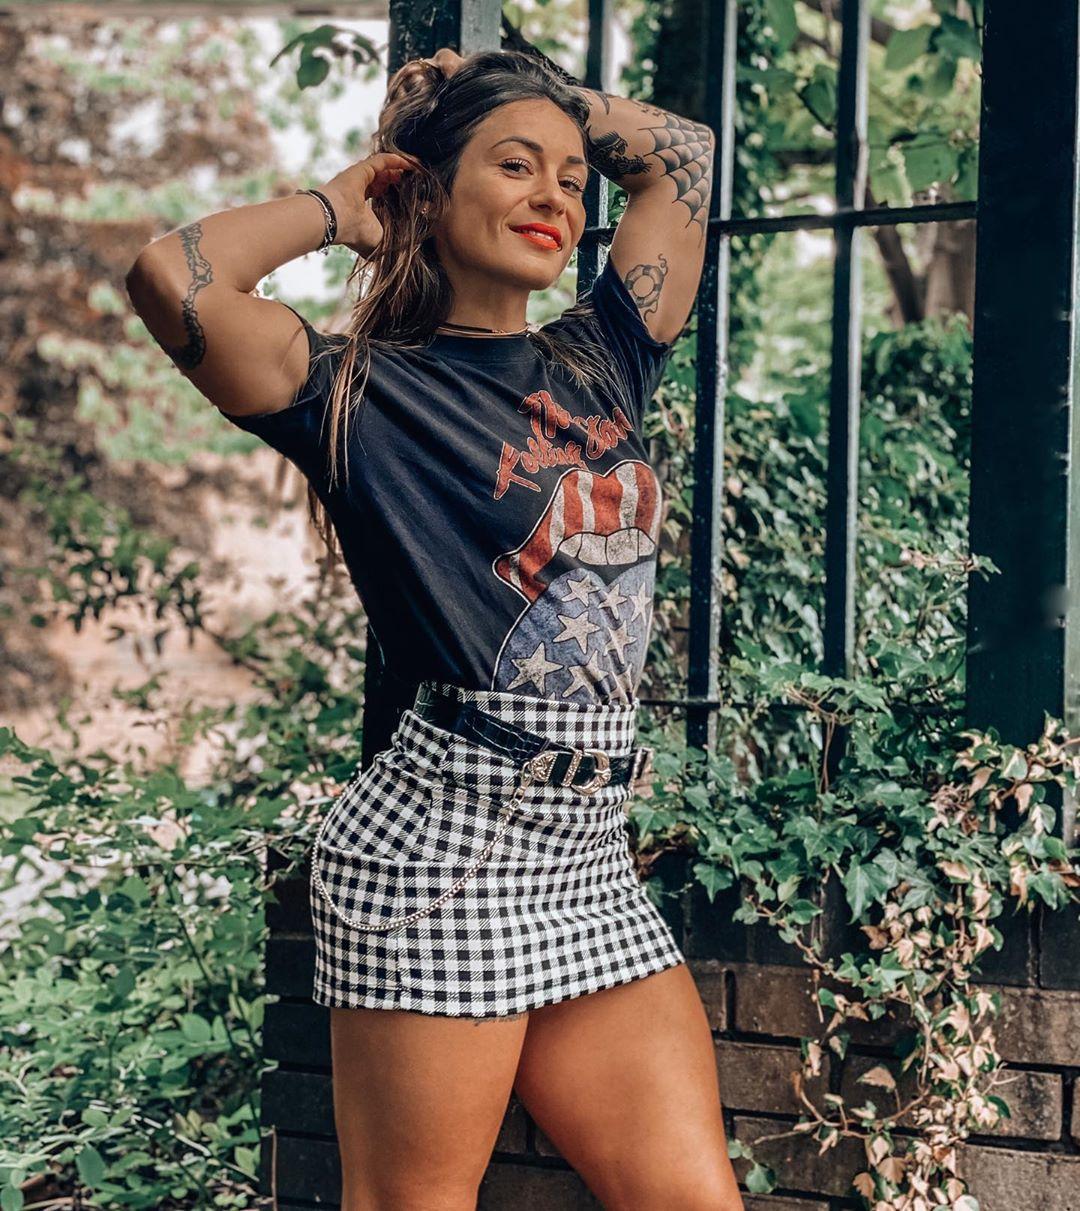 51 Hot Pictures Of Celia Gabbiani Which Make Certain To Grab Your Eye 36